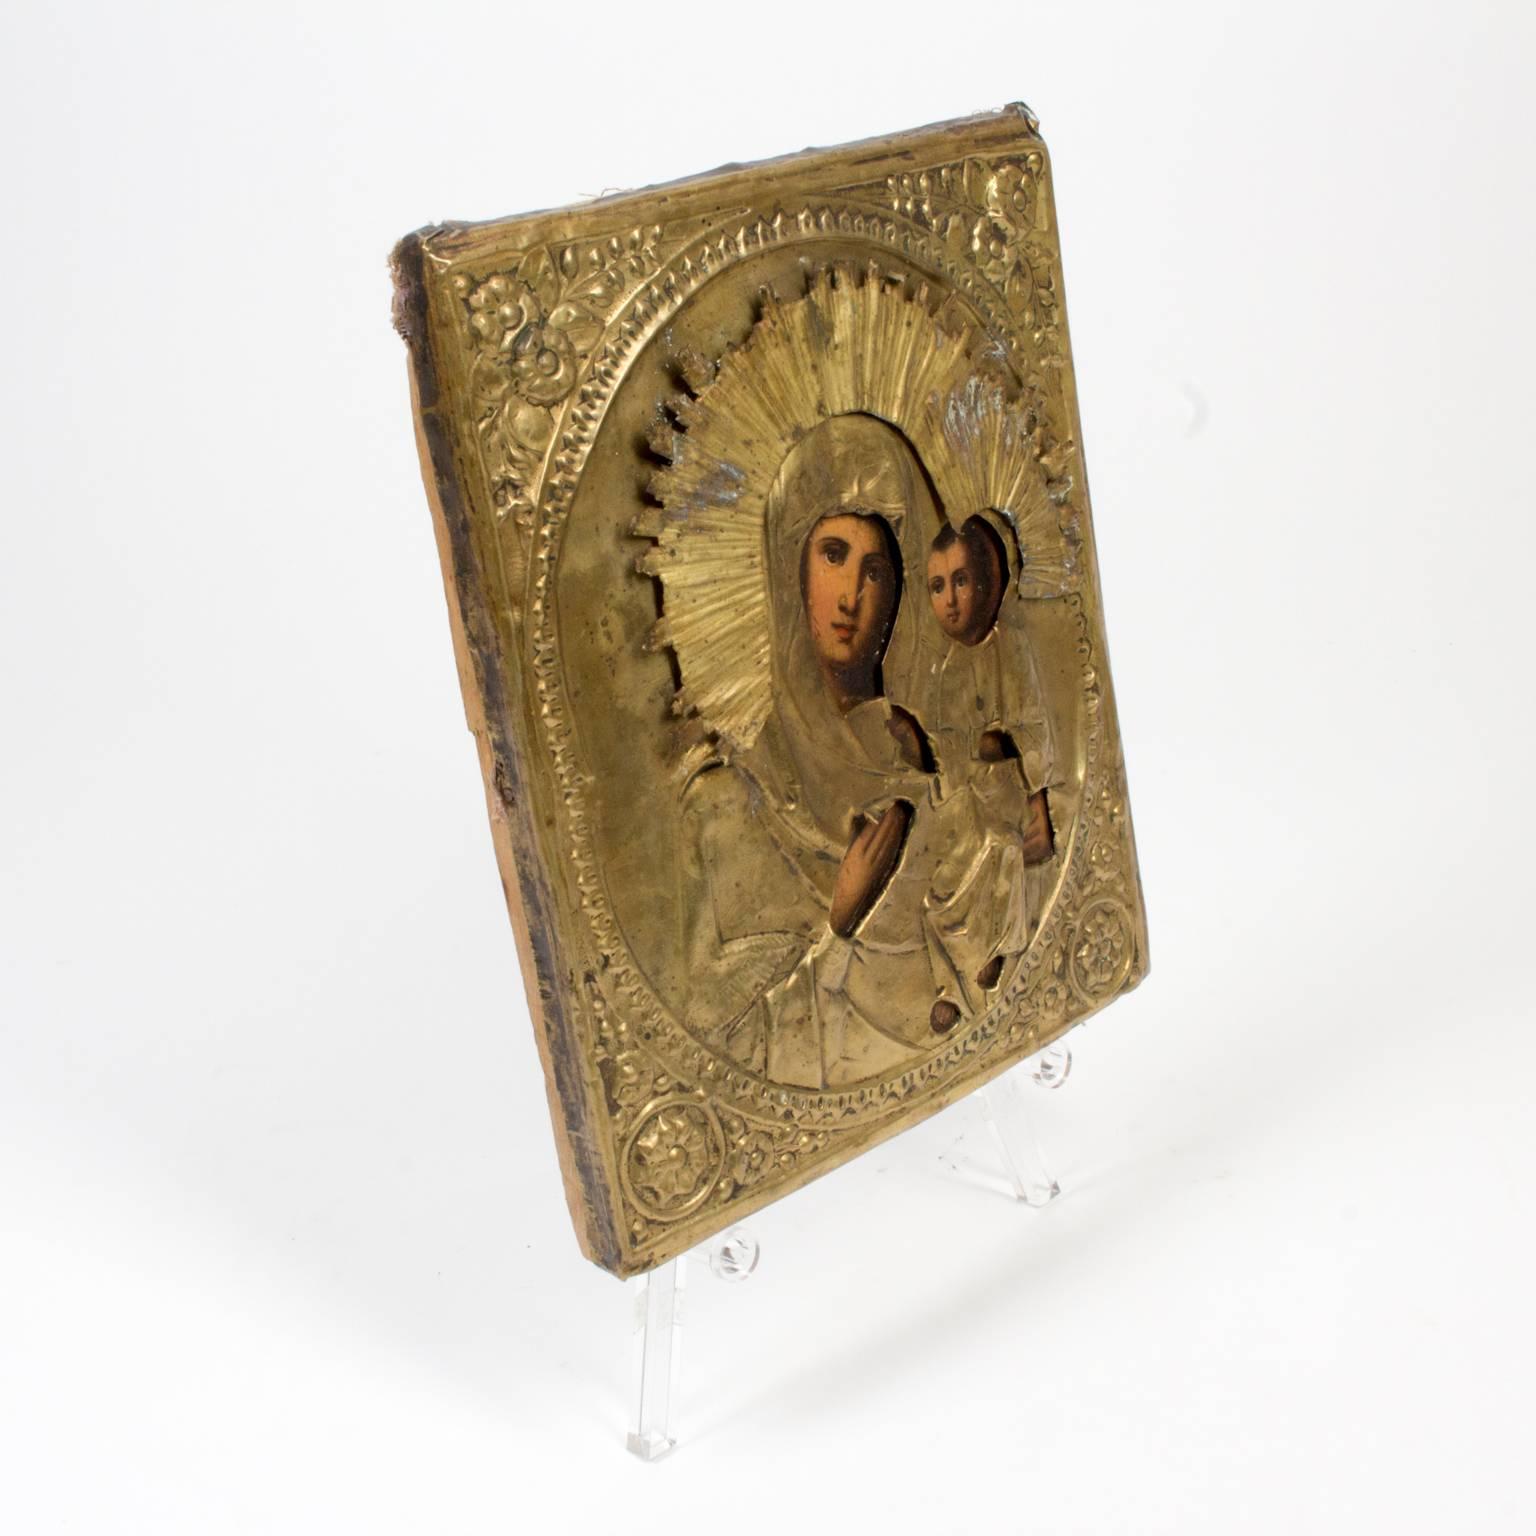 Early 19th century Russian Icon of Our Lady of Iveron hand-painted on oak and covered in a brass repoussee. Measures 8.5 inches by 10.5 inches and 1 inch thick. Also known as the Panagia Portaitissa or the Iviron Theotokos, this icon is an Eastern